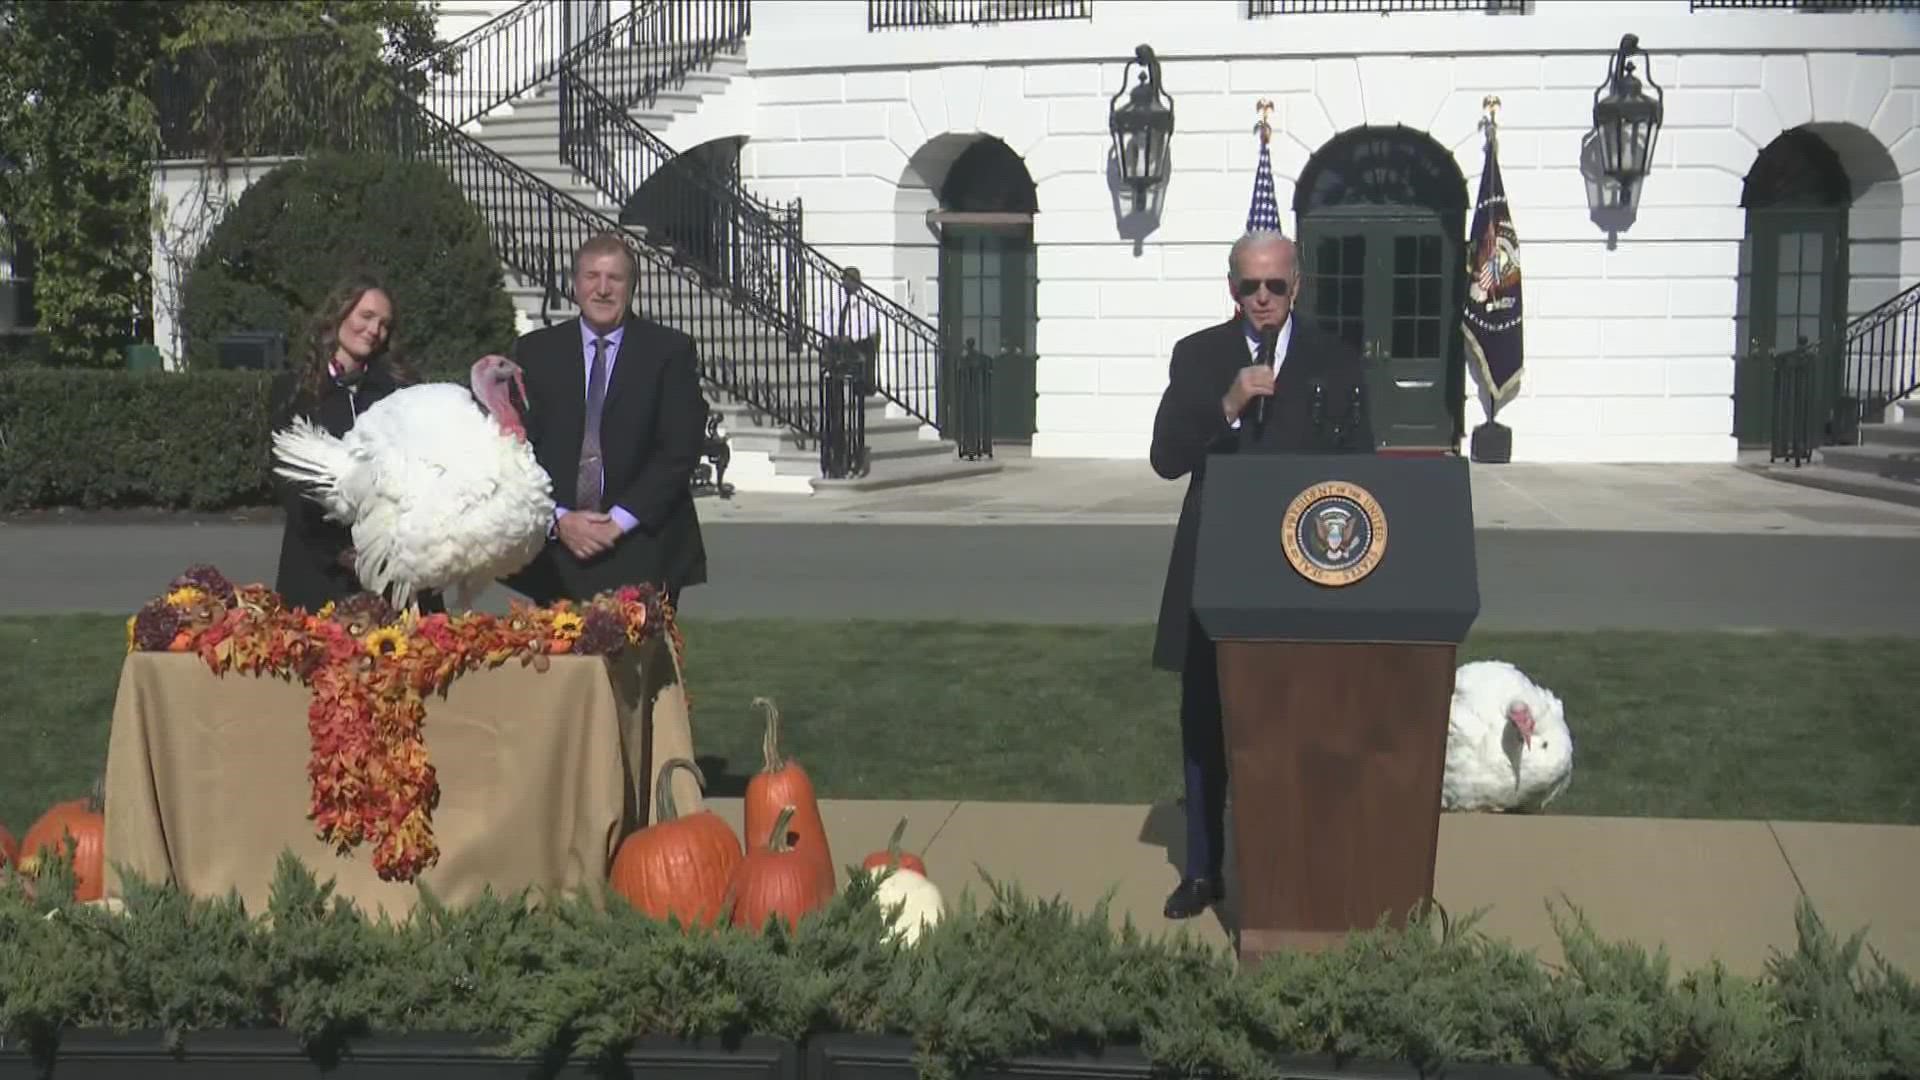 The White House tradition of pardoning one lucky turkey goes back decades, giving presidents the chance for a lighter speech.